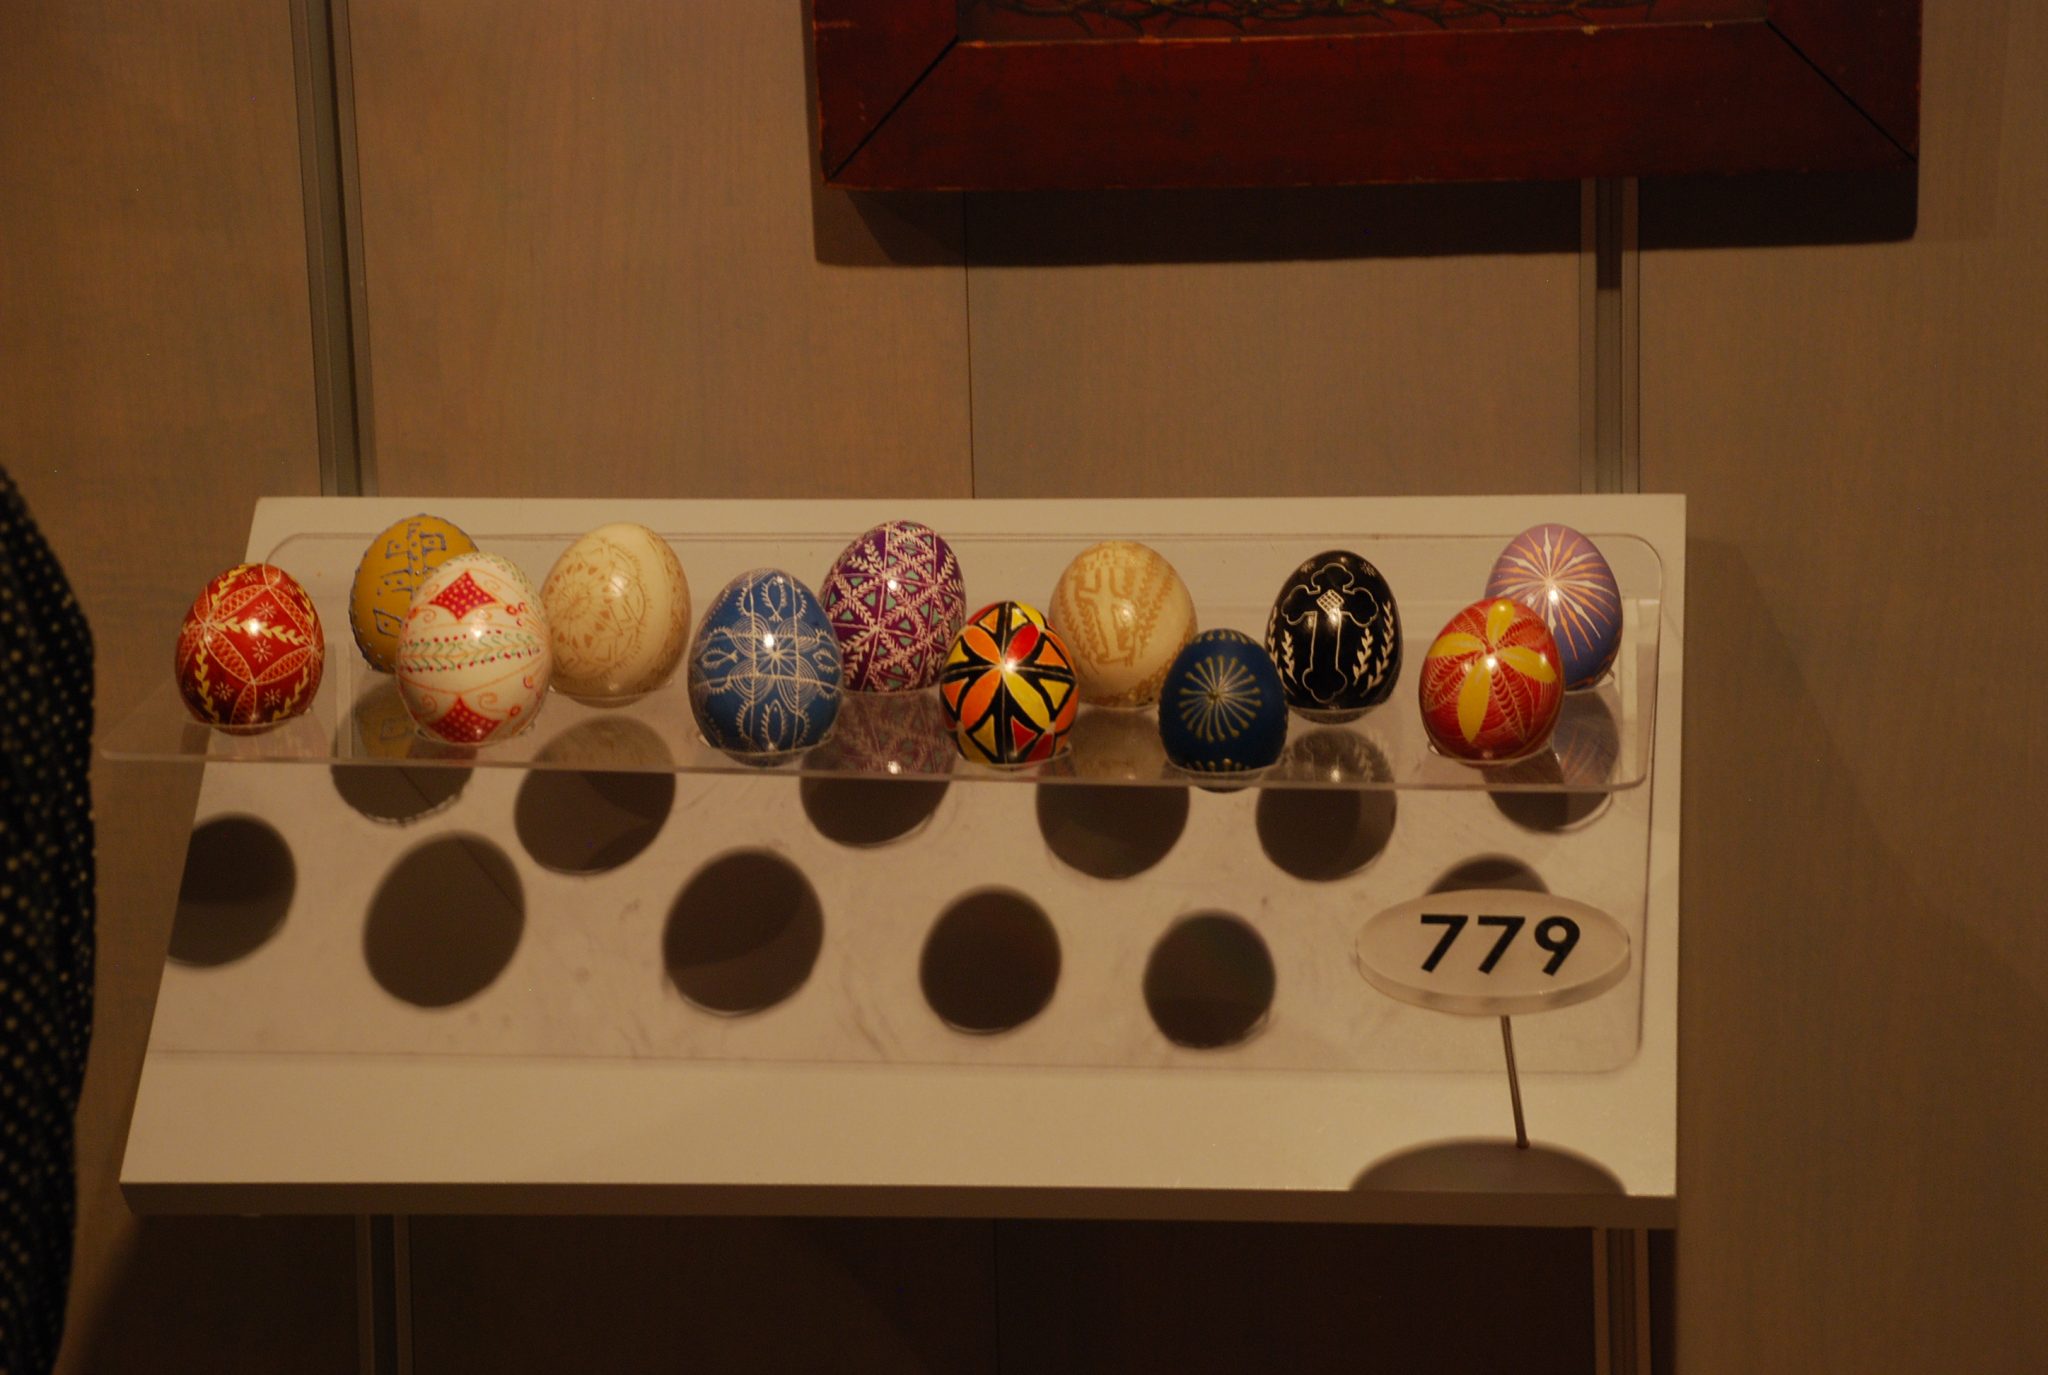 Pysanky eggs on display in the Carpatho Rusyn section of the Special Collections Gallery.